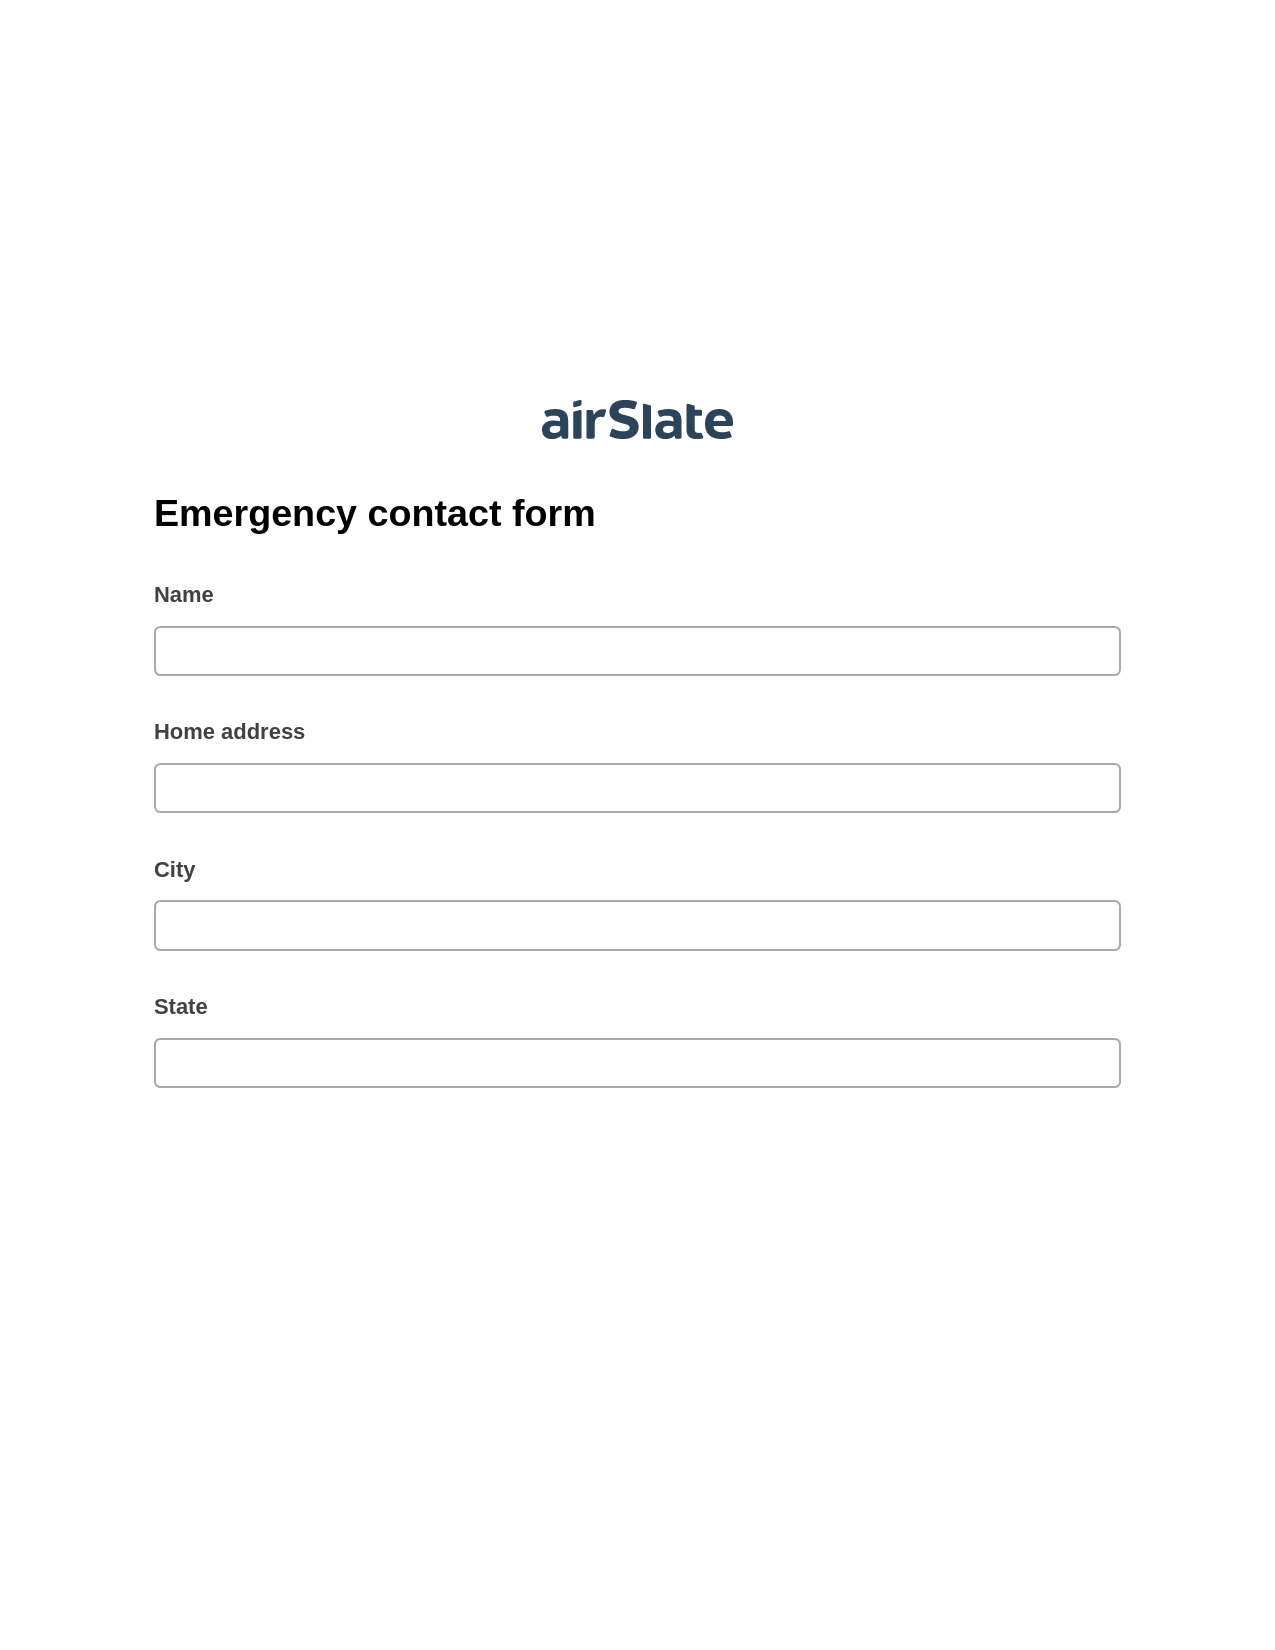 Emergency contact form Pre-fill from MySQL Dropdown Options Bot, Create MS Dynamics 365 Records Bot, Archive to SharePoint Folder Bot